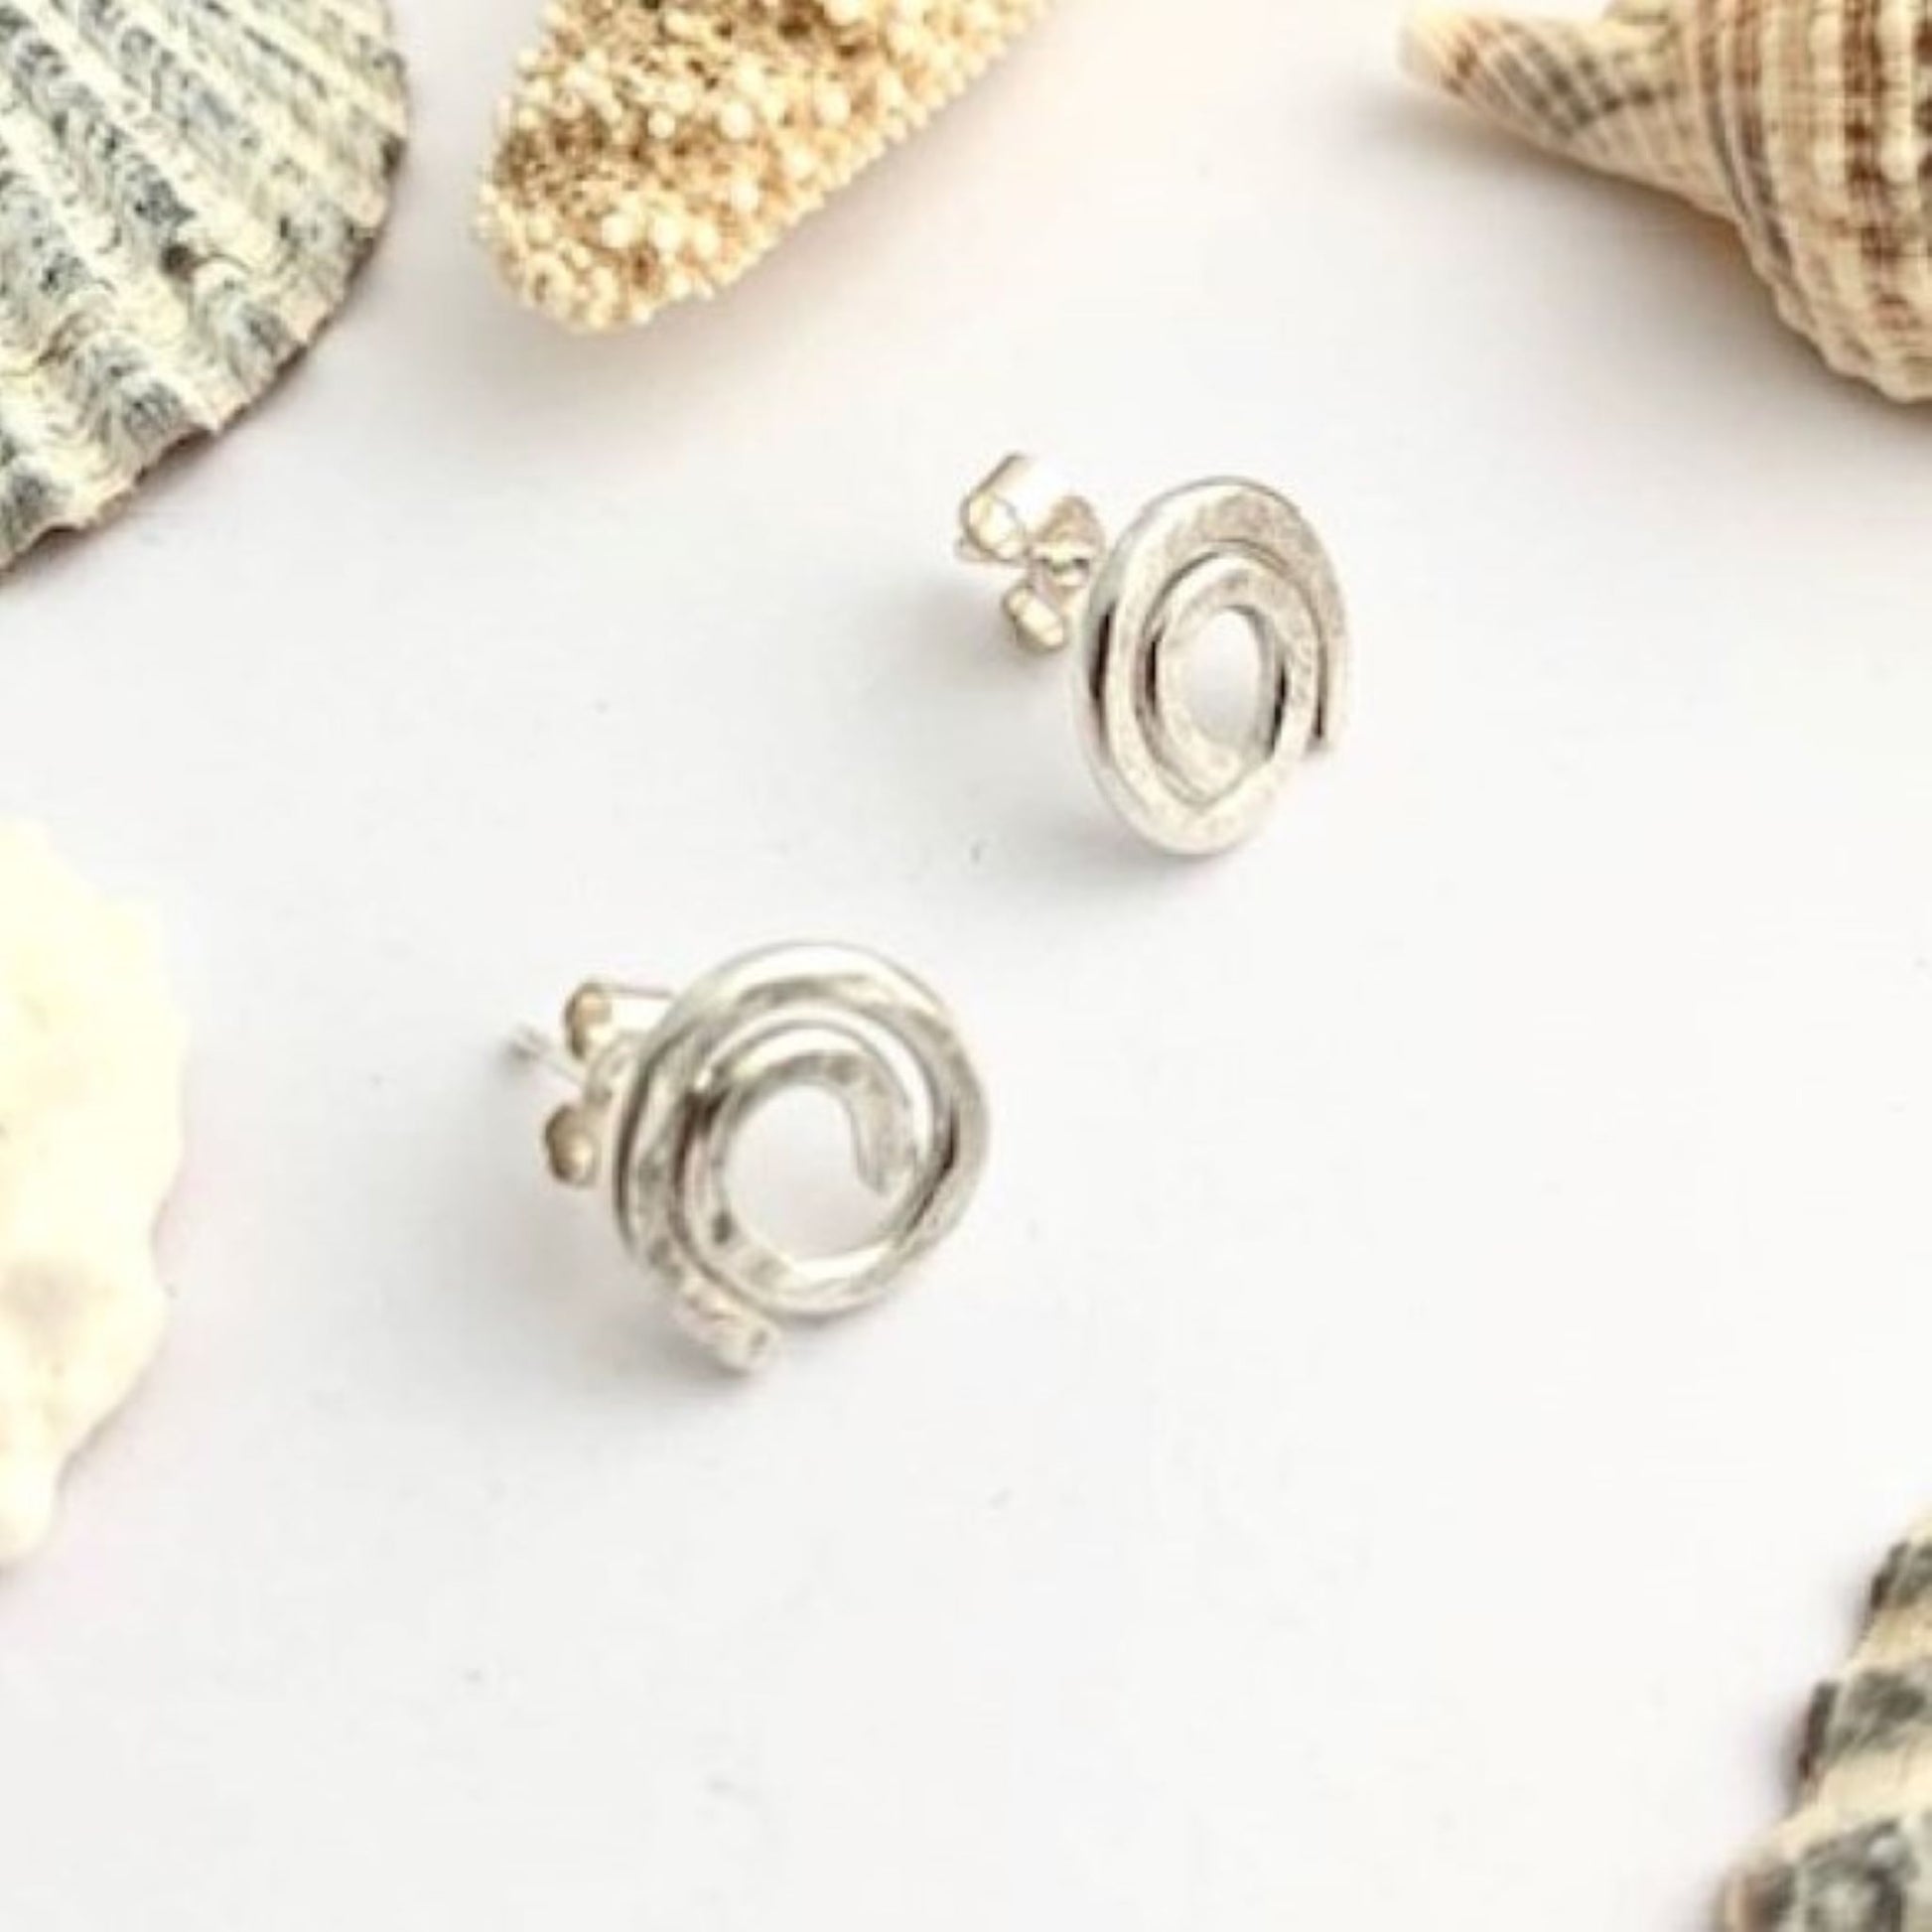 Tiny Sterling Silver Hammered Coil Stud Earrings